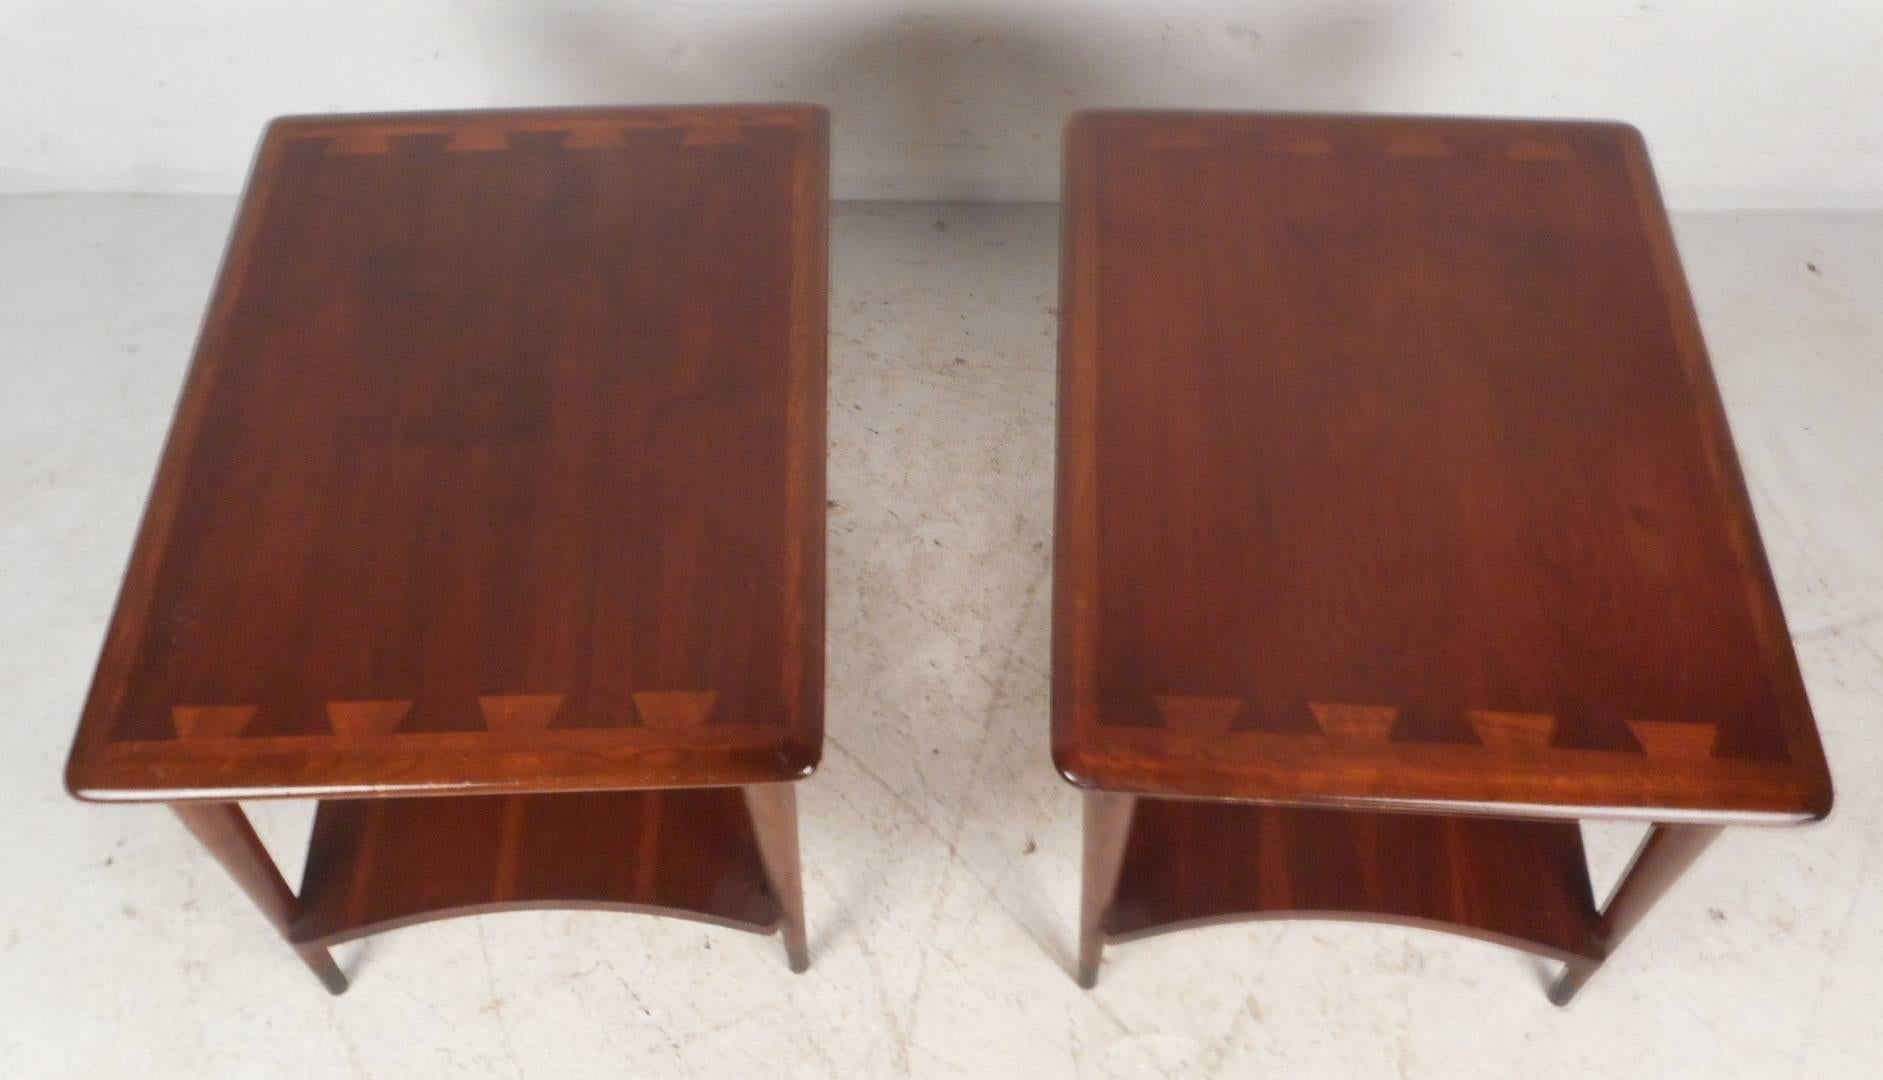 Late 20th Century Mid-Century Modern End Tables by Lane Furniture